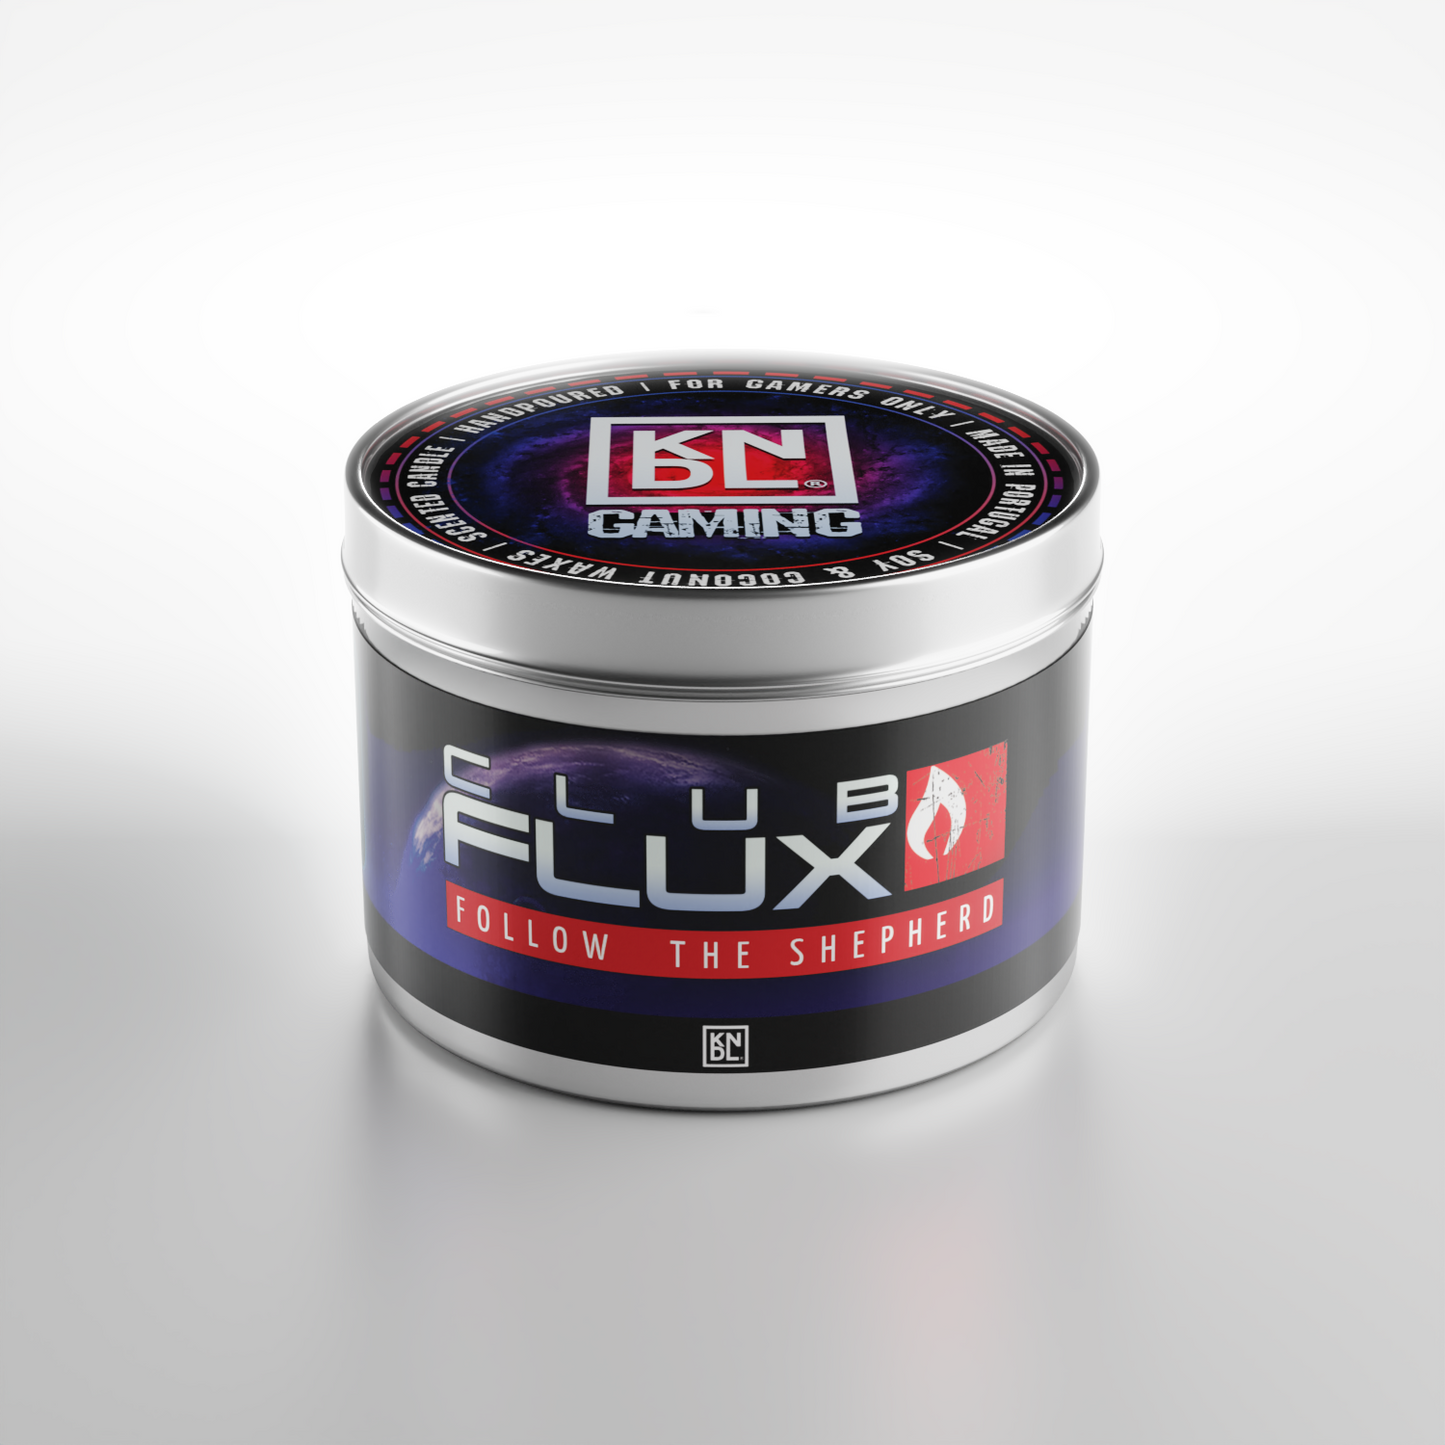 TIN NR 27 | CLUB FLUX | MASS EFFECT INSPIRED SCENTED CANDLE